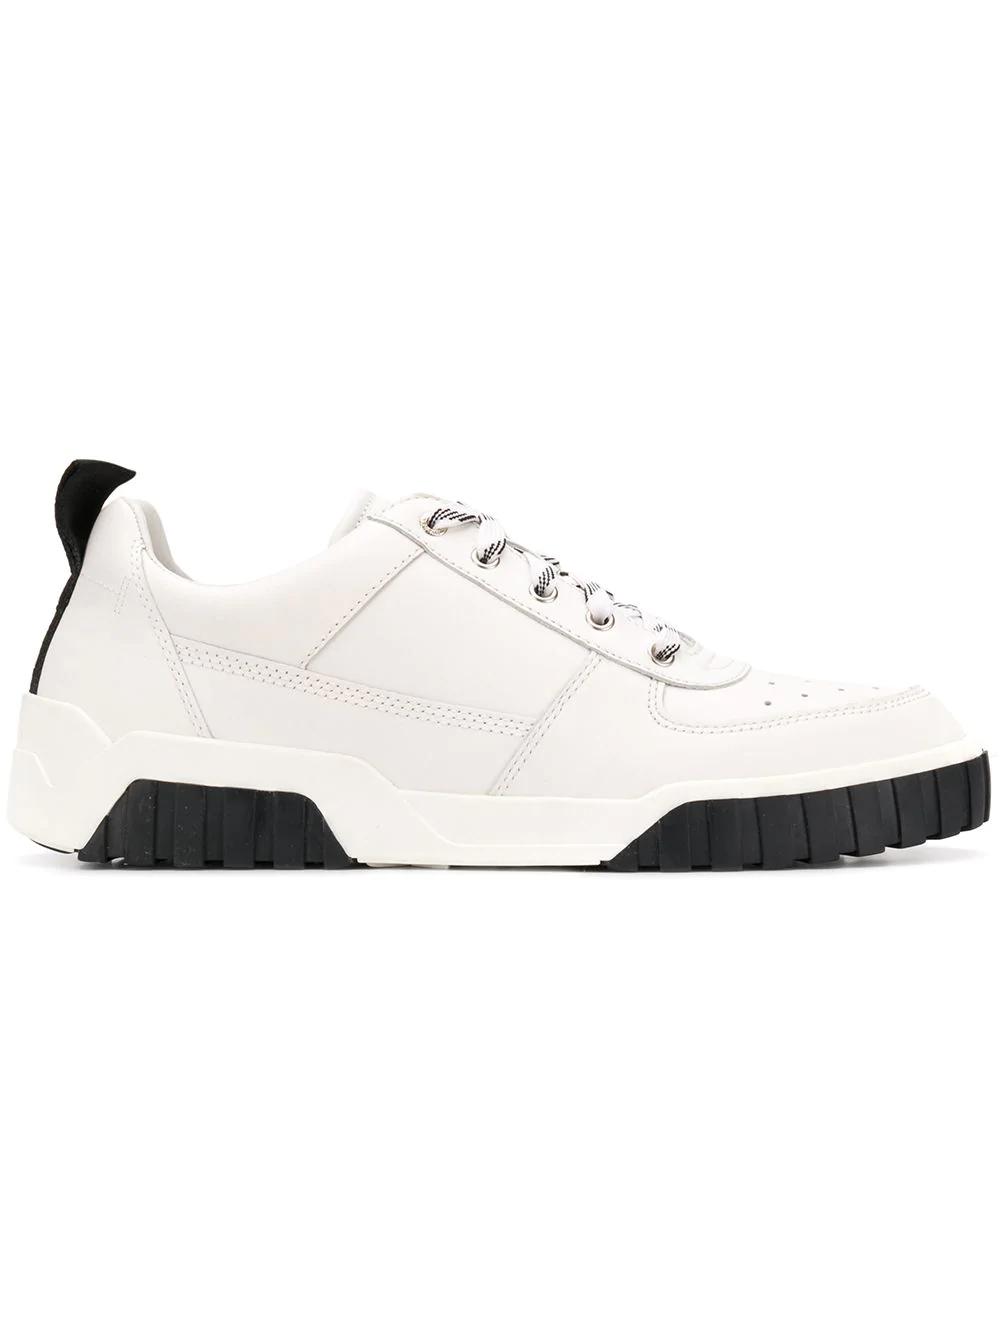 Diesel Classic Lace-Up Sneakers - White | ModeSens